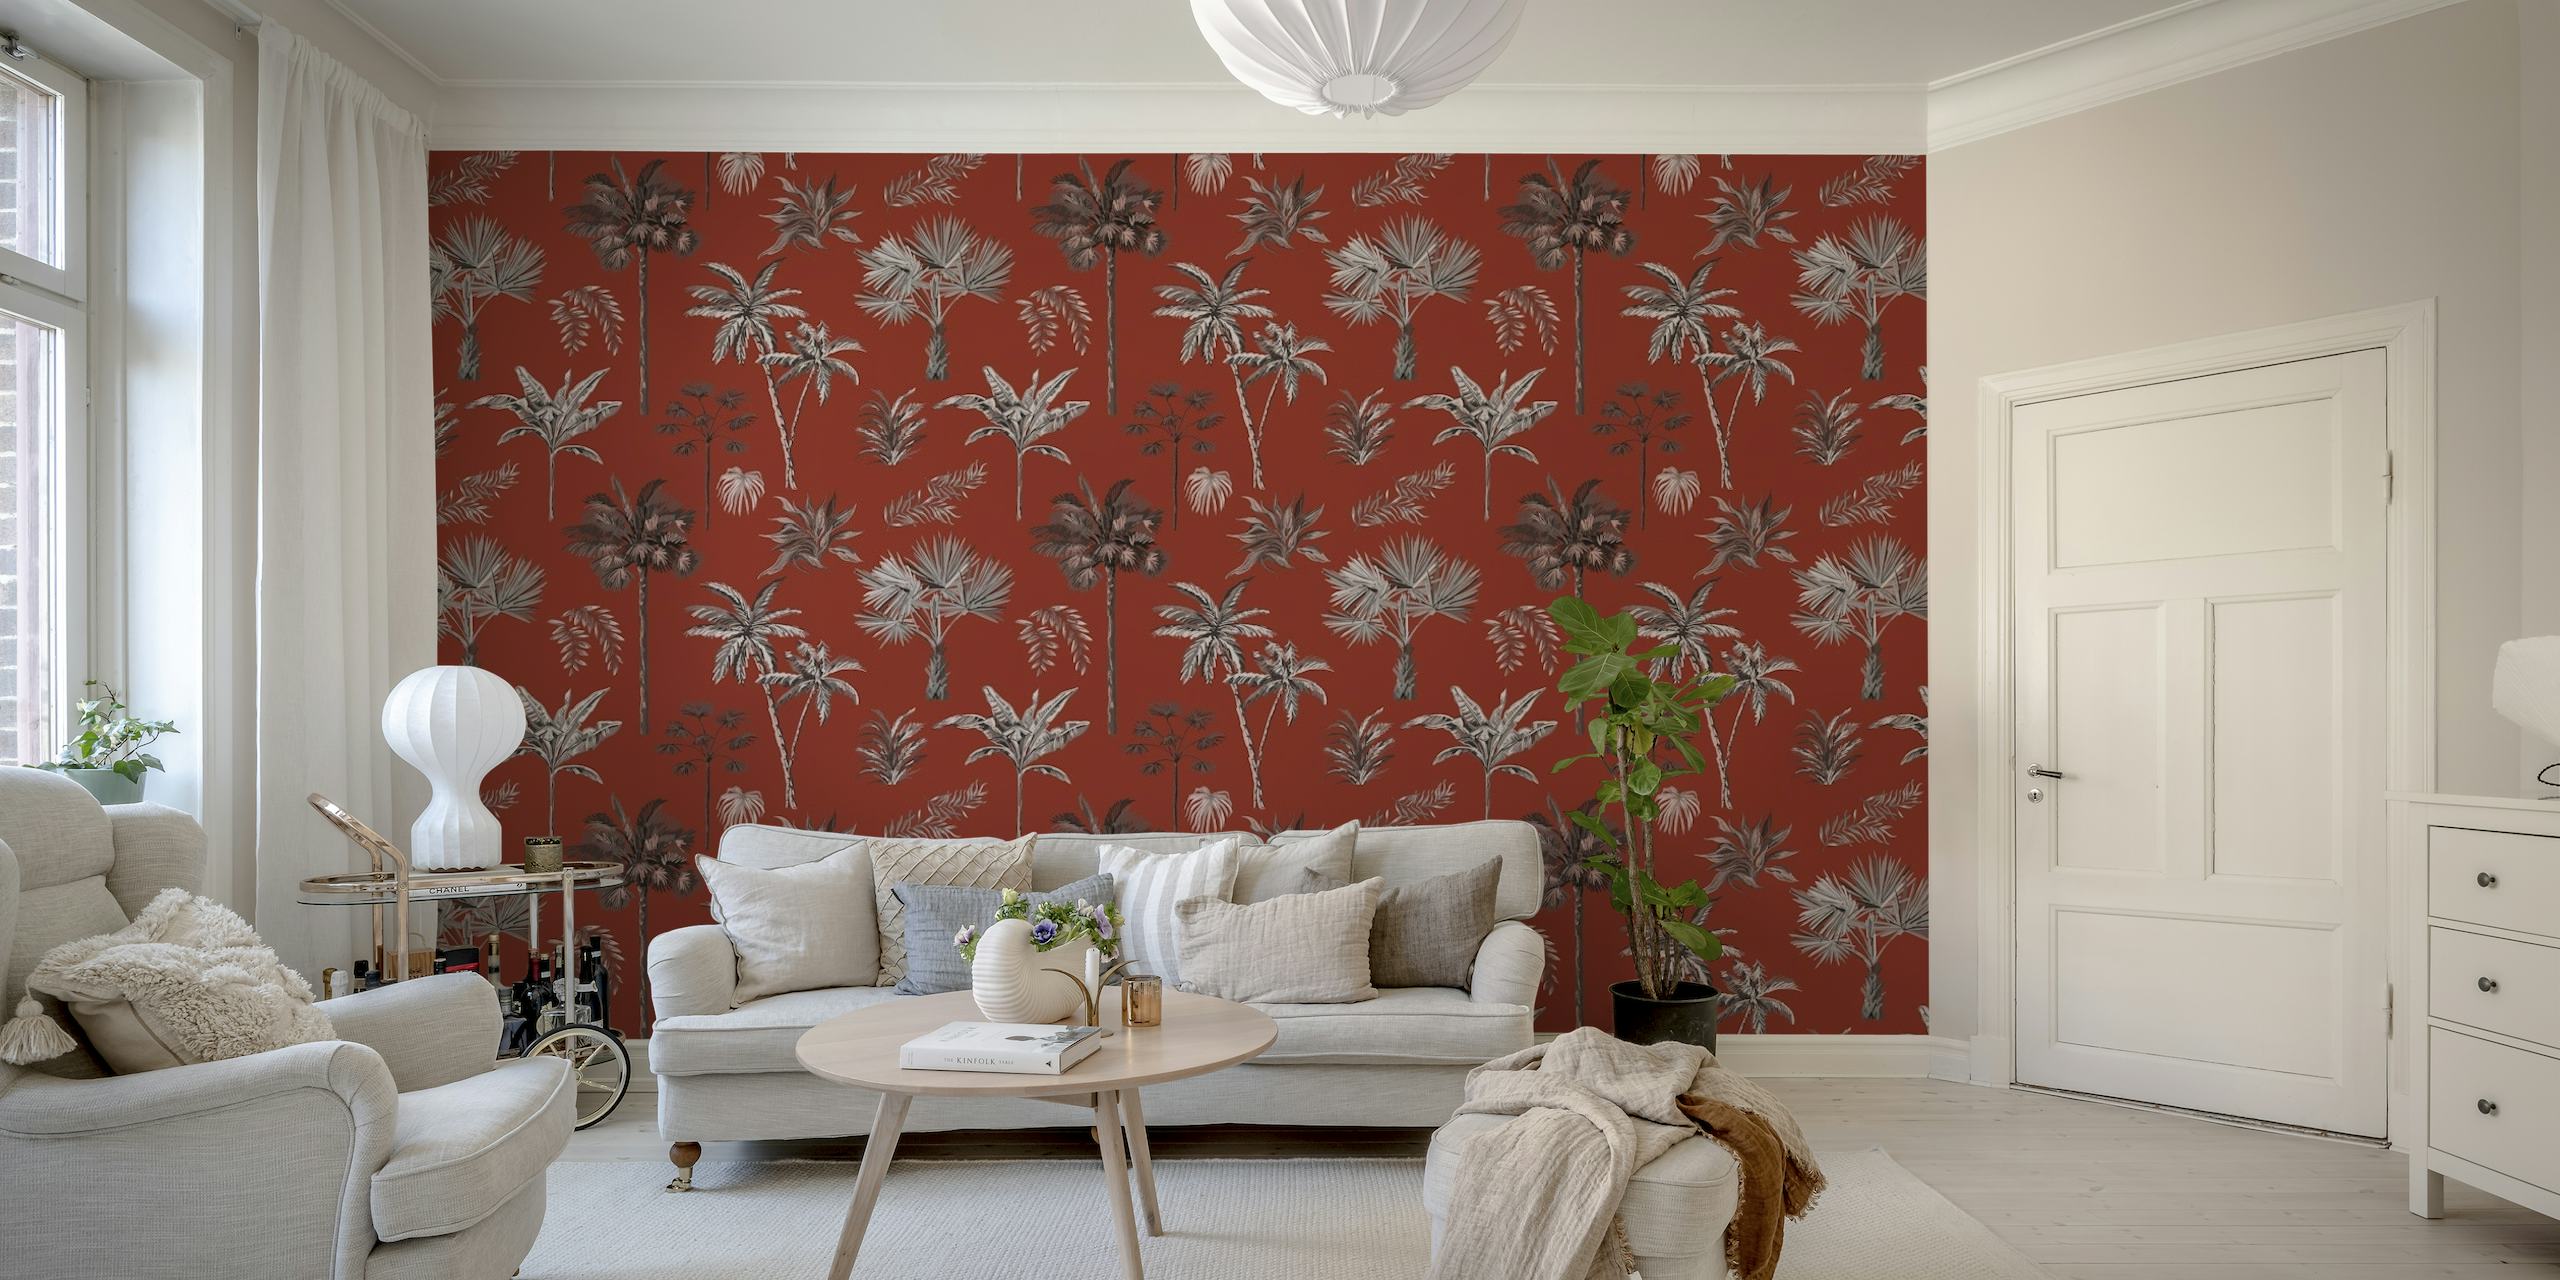 Traditional Indian tree pattern wall mural with red background and silver floral designs